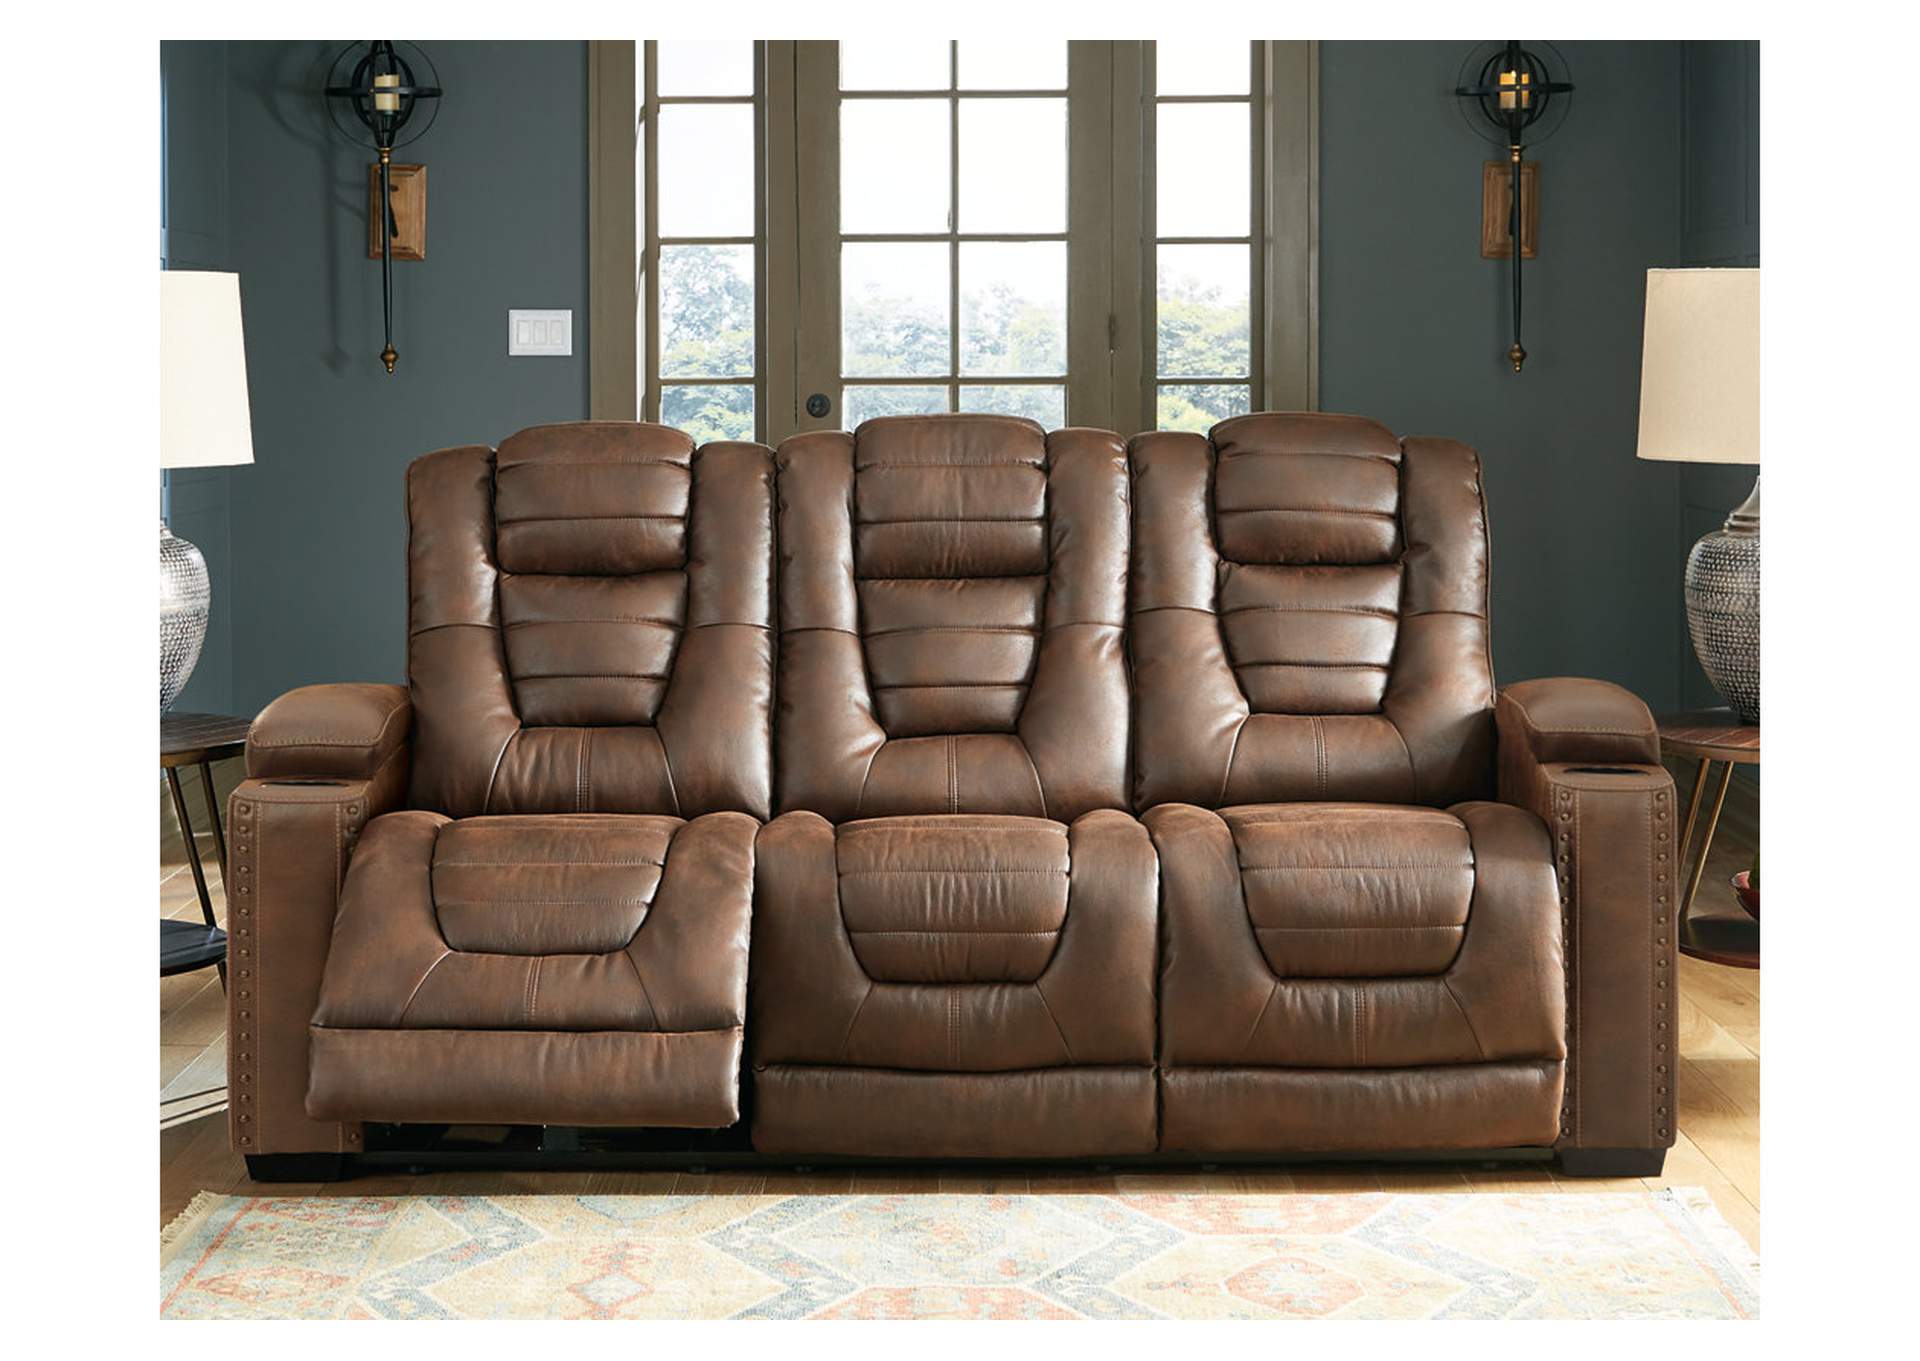 Owner's Box Sofa, Loveseat and Recliner,Signature Design By Ashley